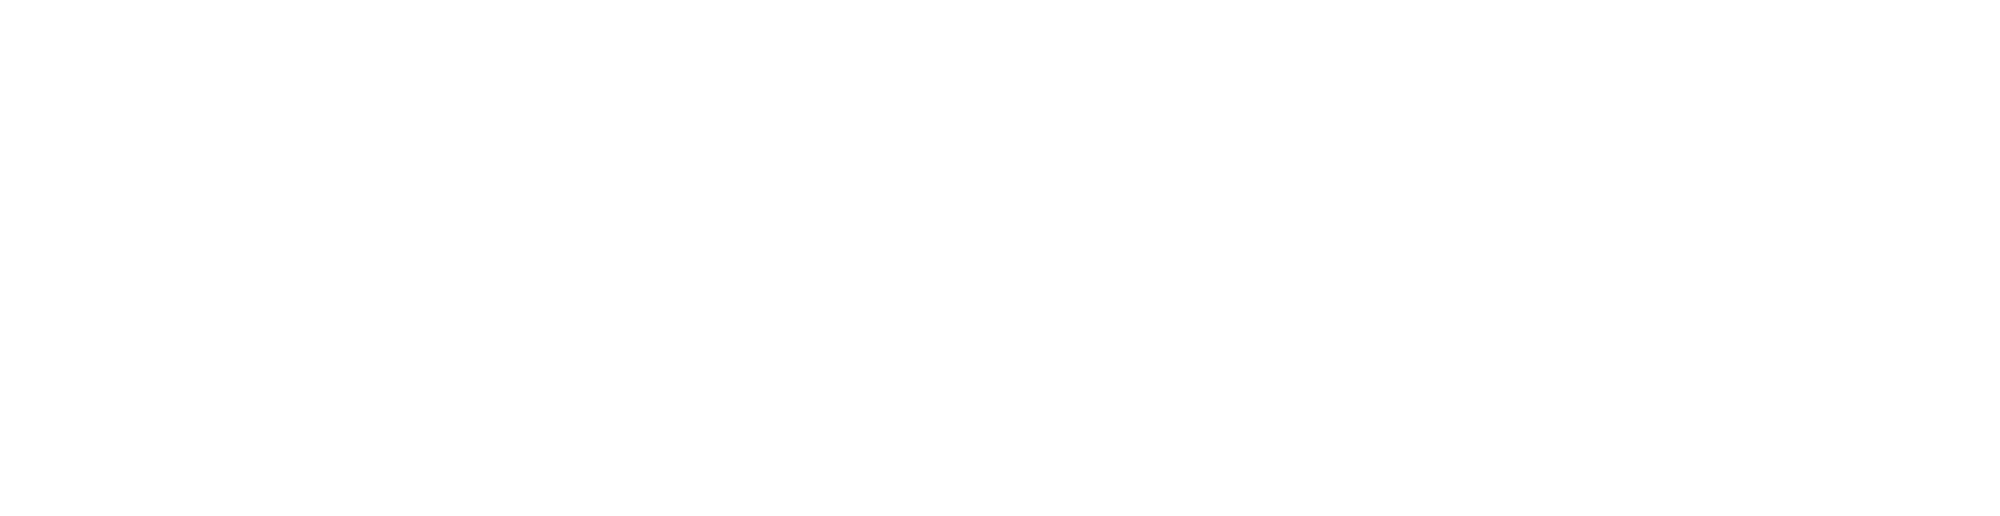 My Fitness Guides